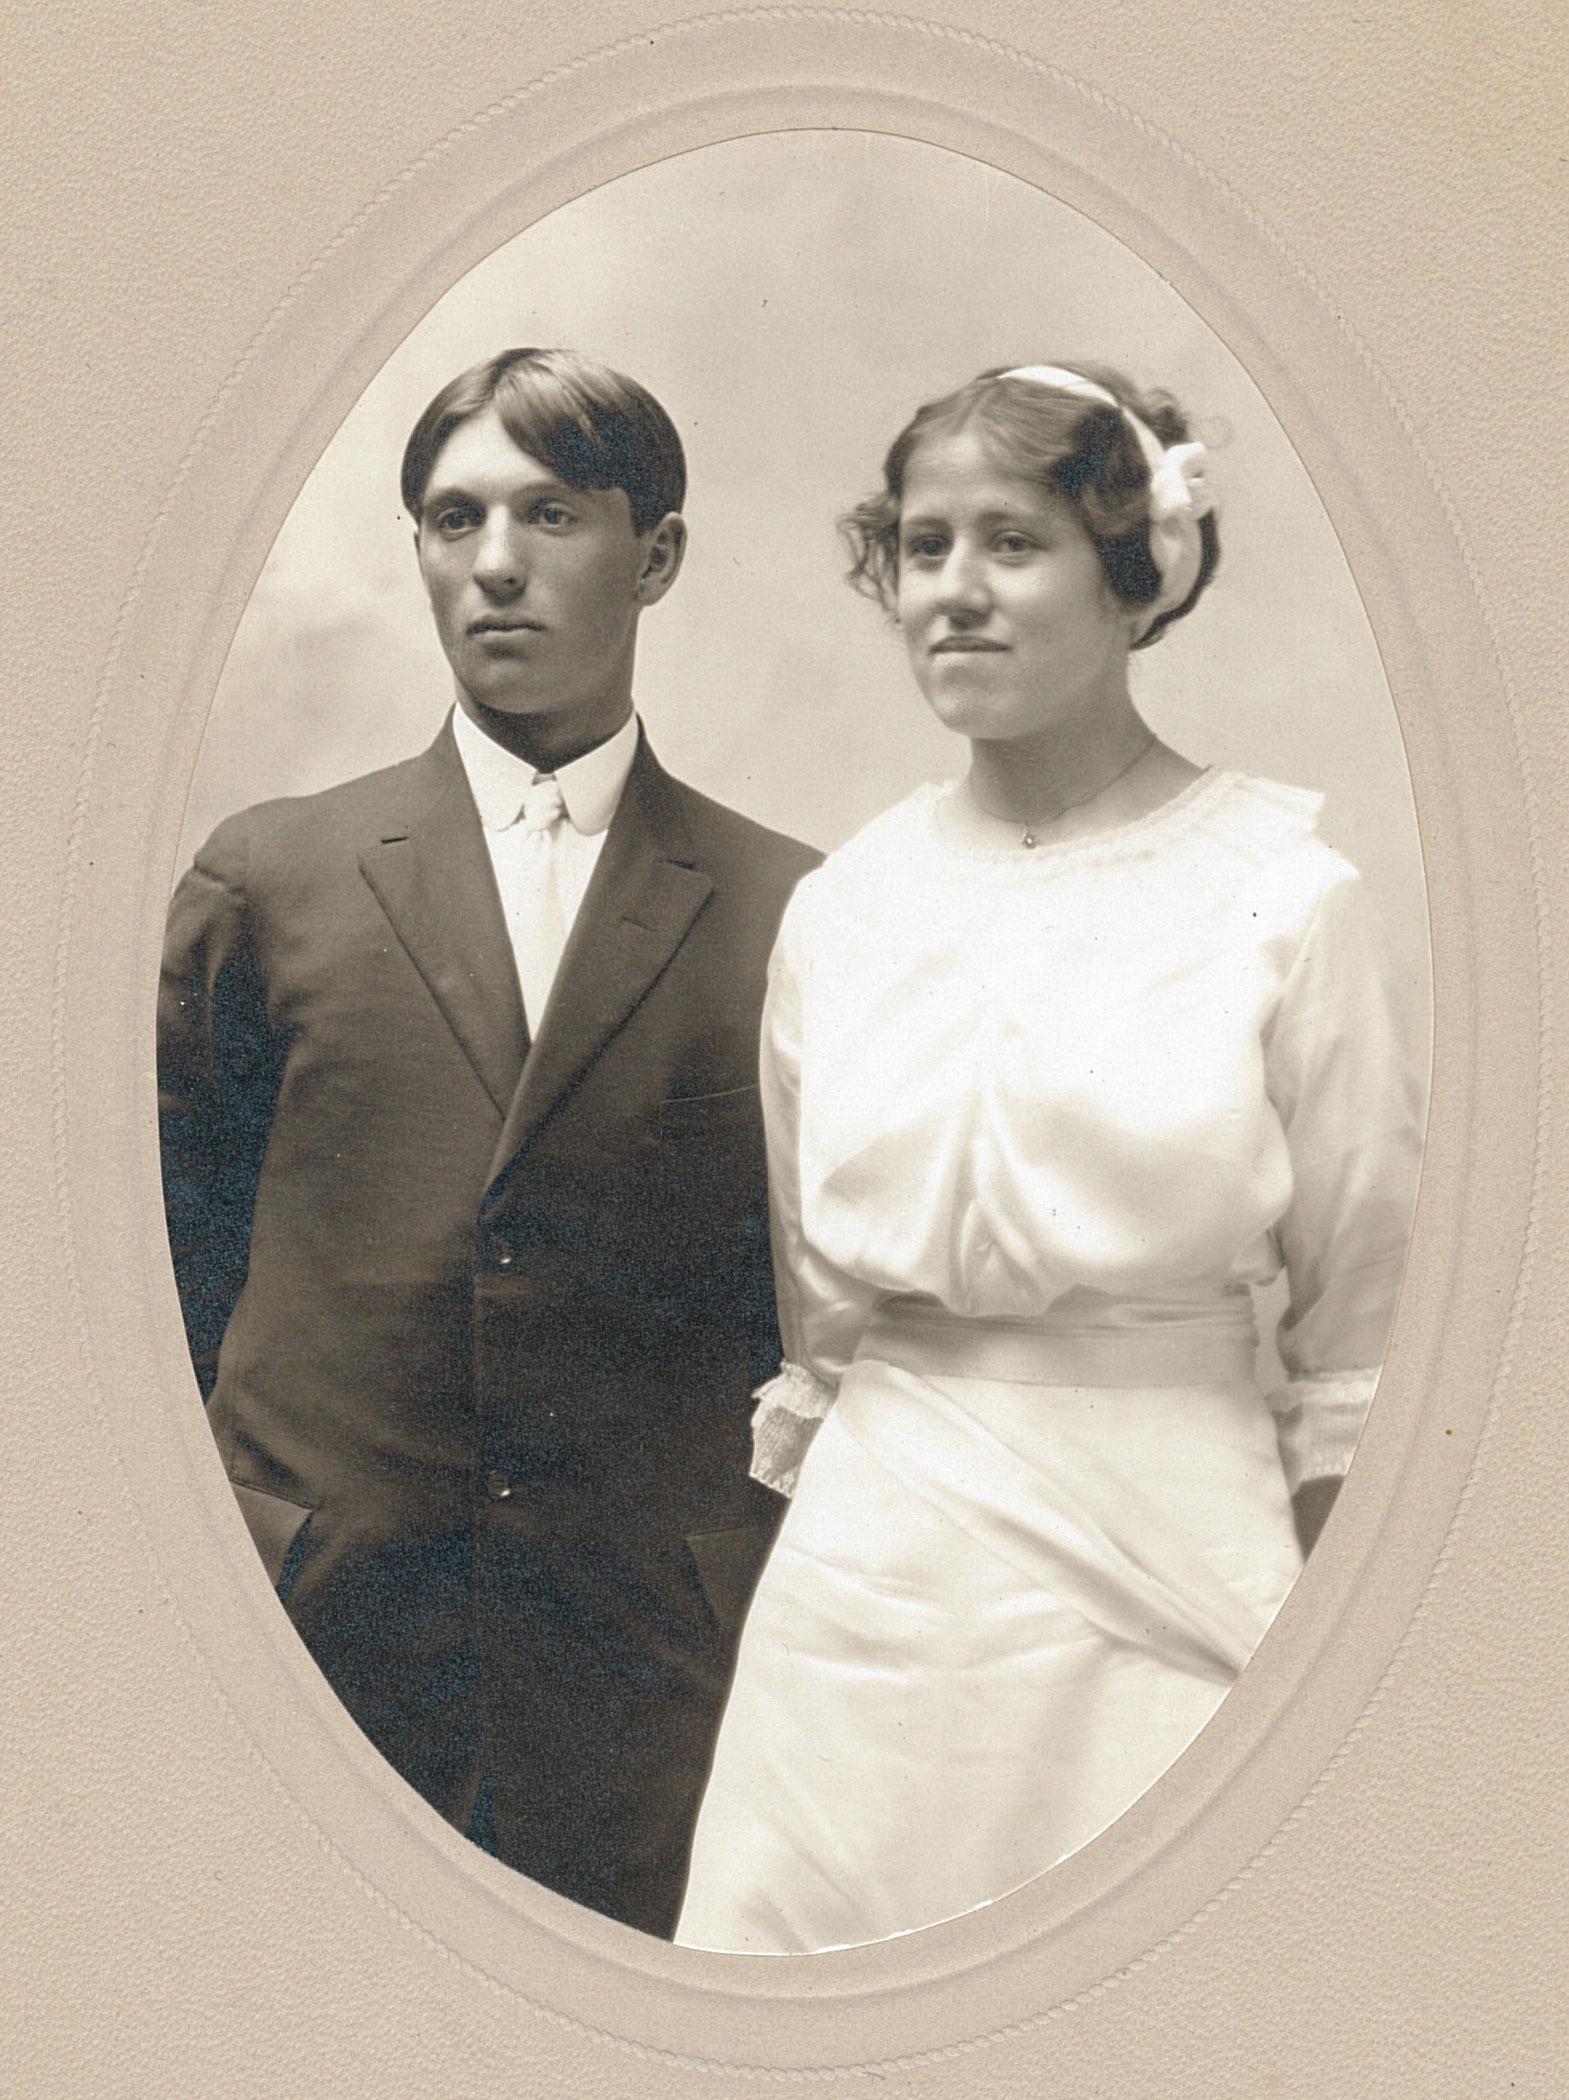 Studio photo of Bill and Lydia Sonnenberg on their wedding day, December 17, 1913.